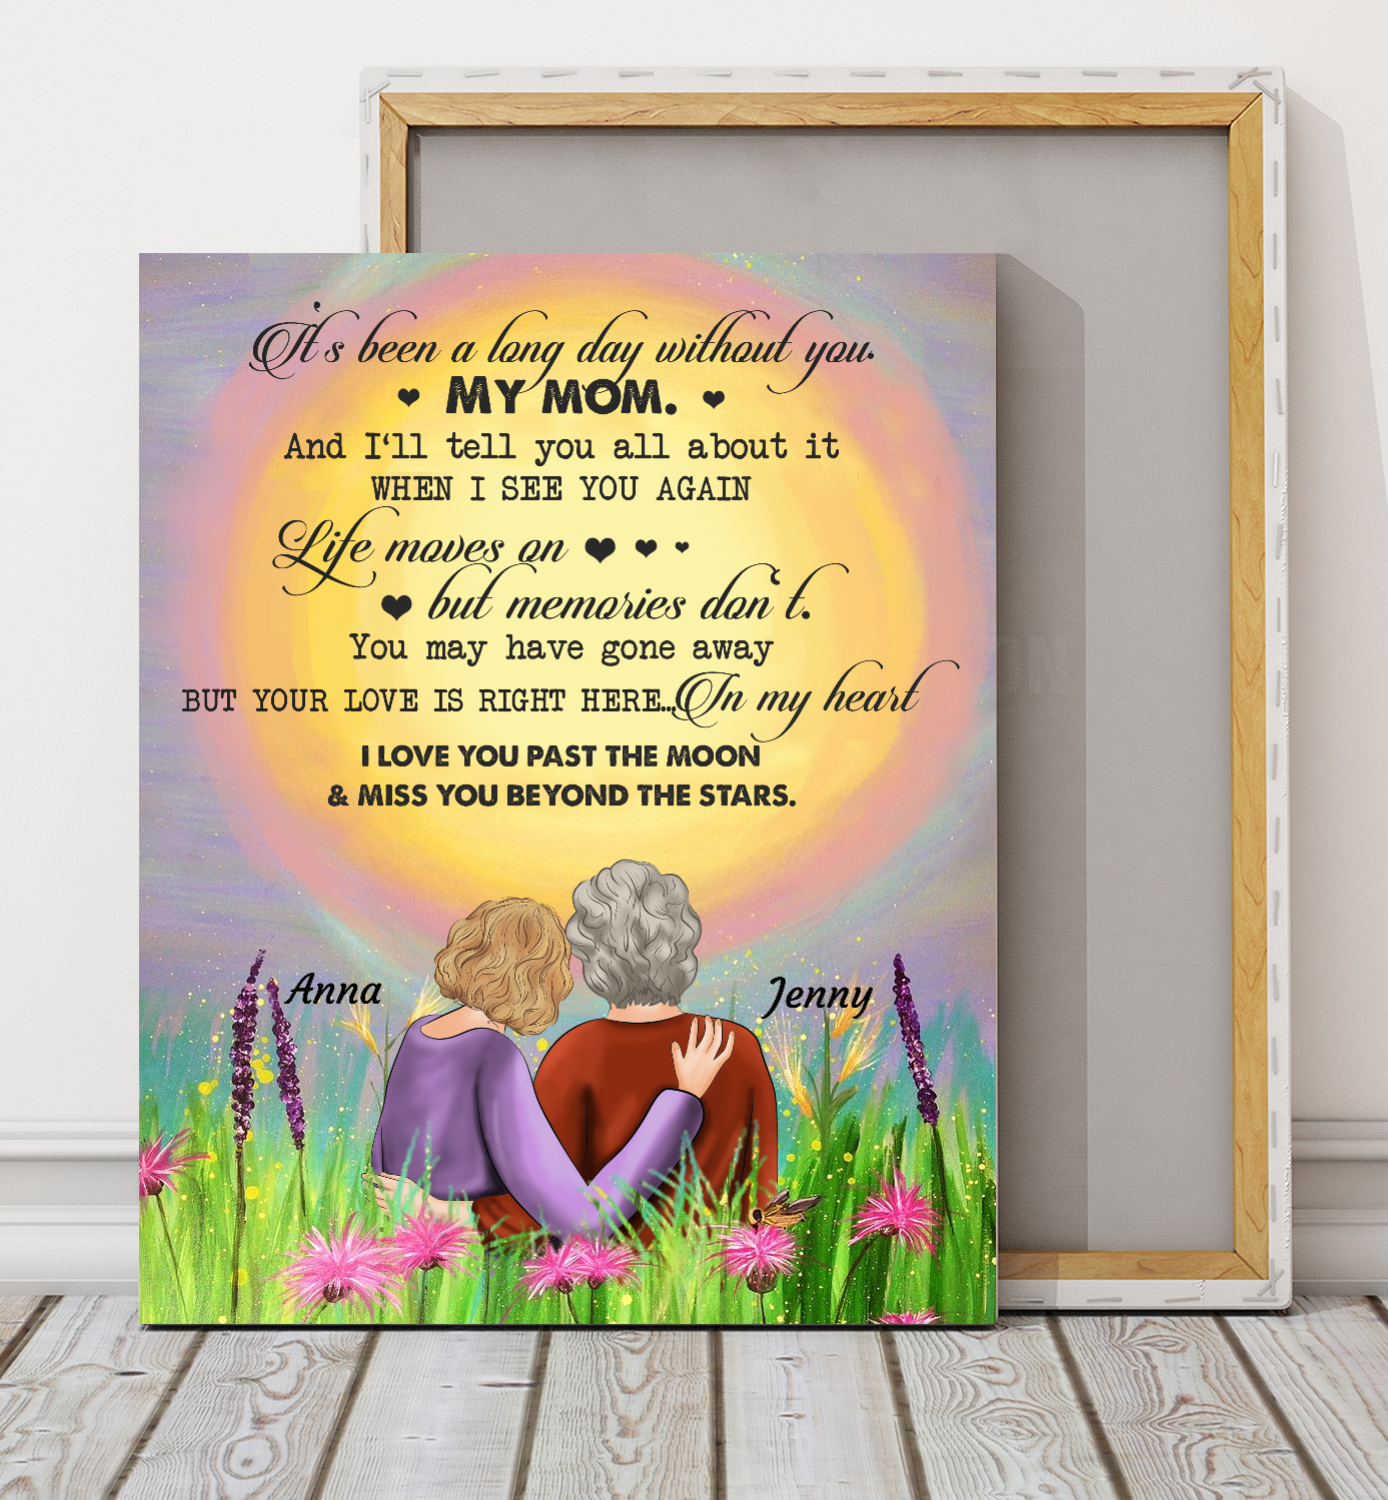 Mom It's Been A Long Day Without You - Mother's day personalized gifts ideas for mom presents for special woman memorial custom gift canvas